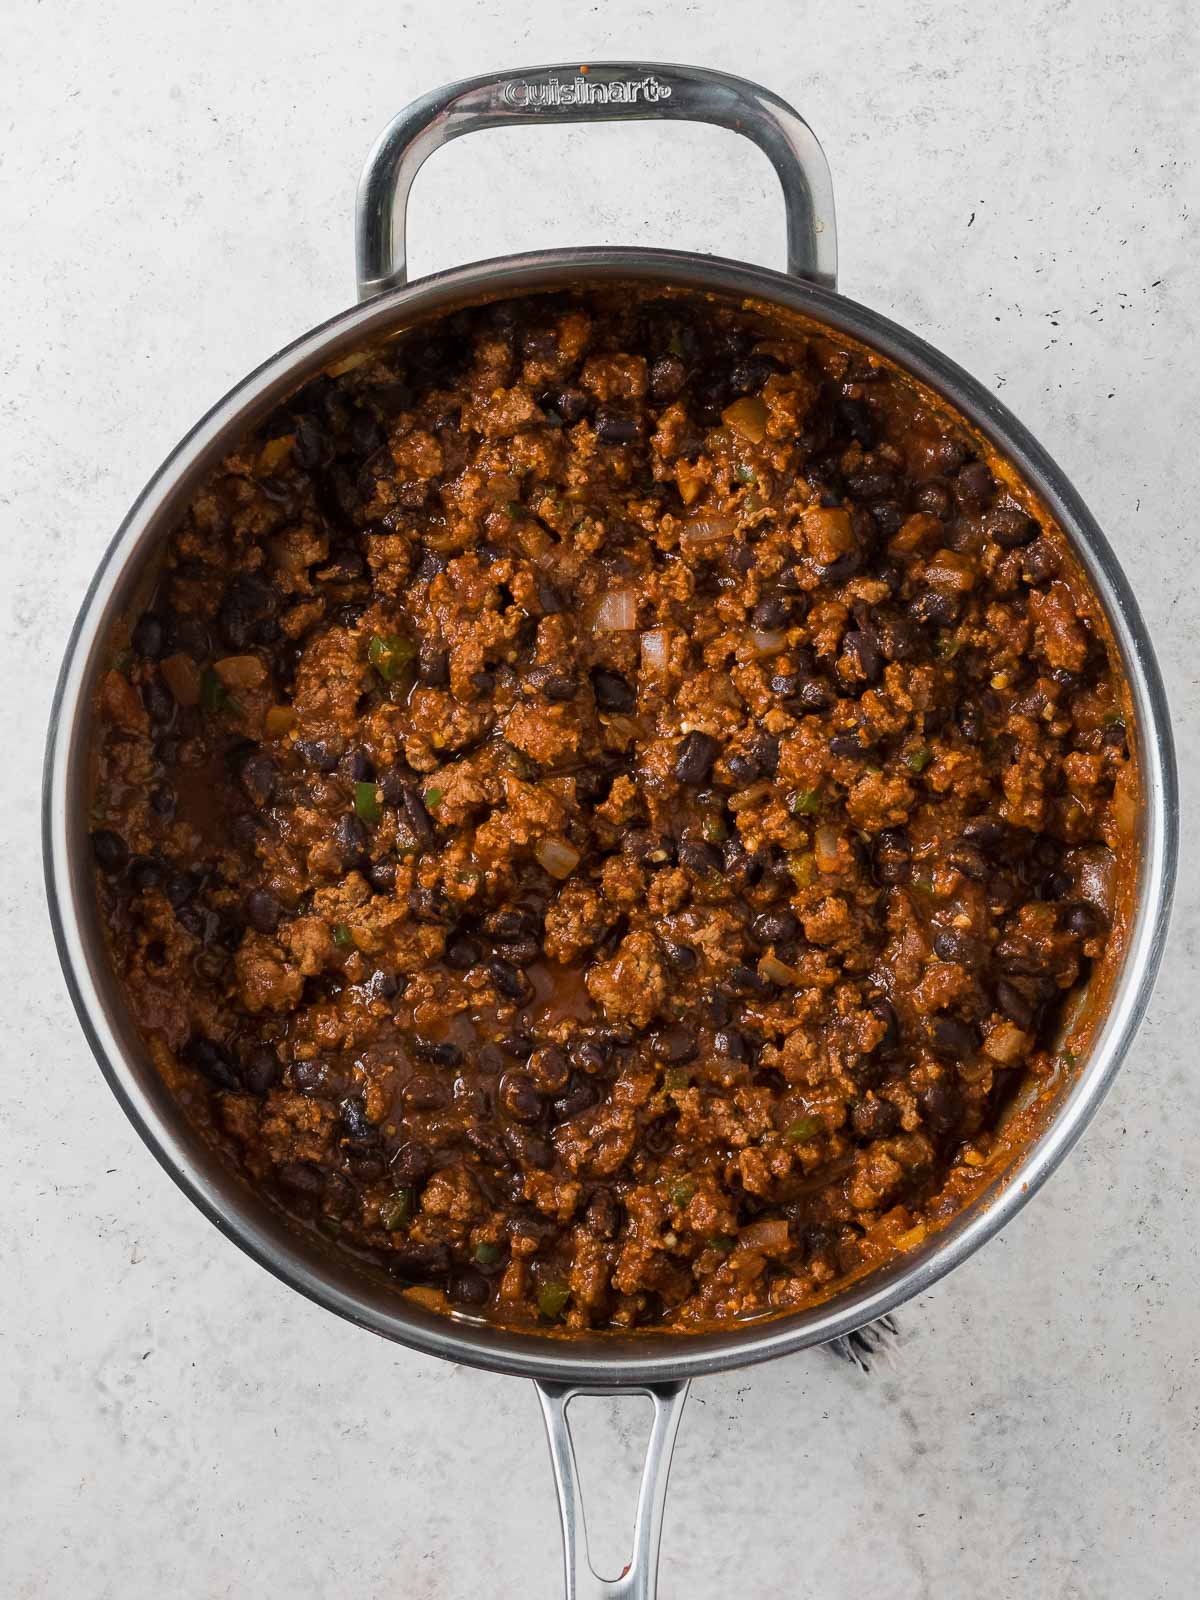 A skillet full of cooked and seasoned ground beef for Mexican Cornbread Casserole.